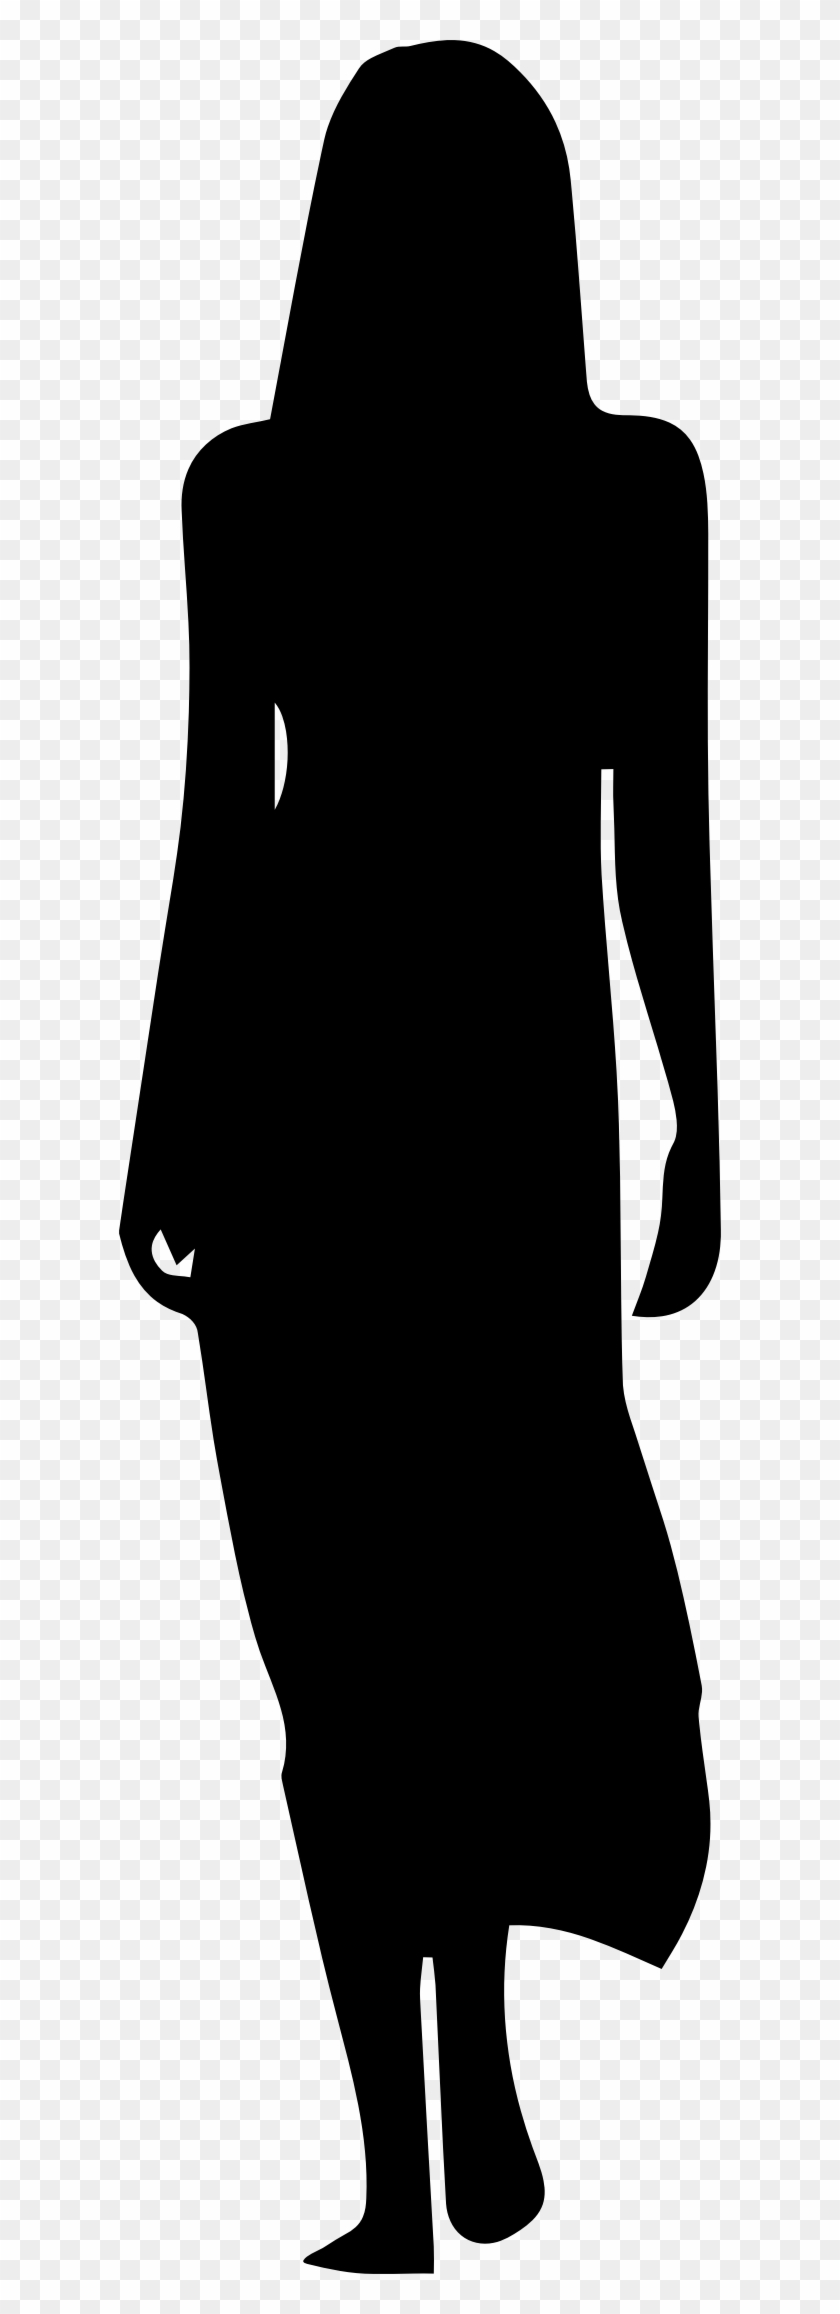 Clipart - Woman In Dress Silhouette #371138